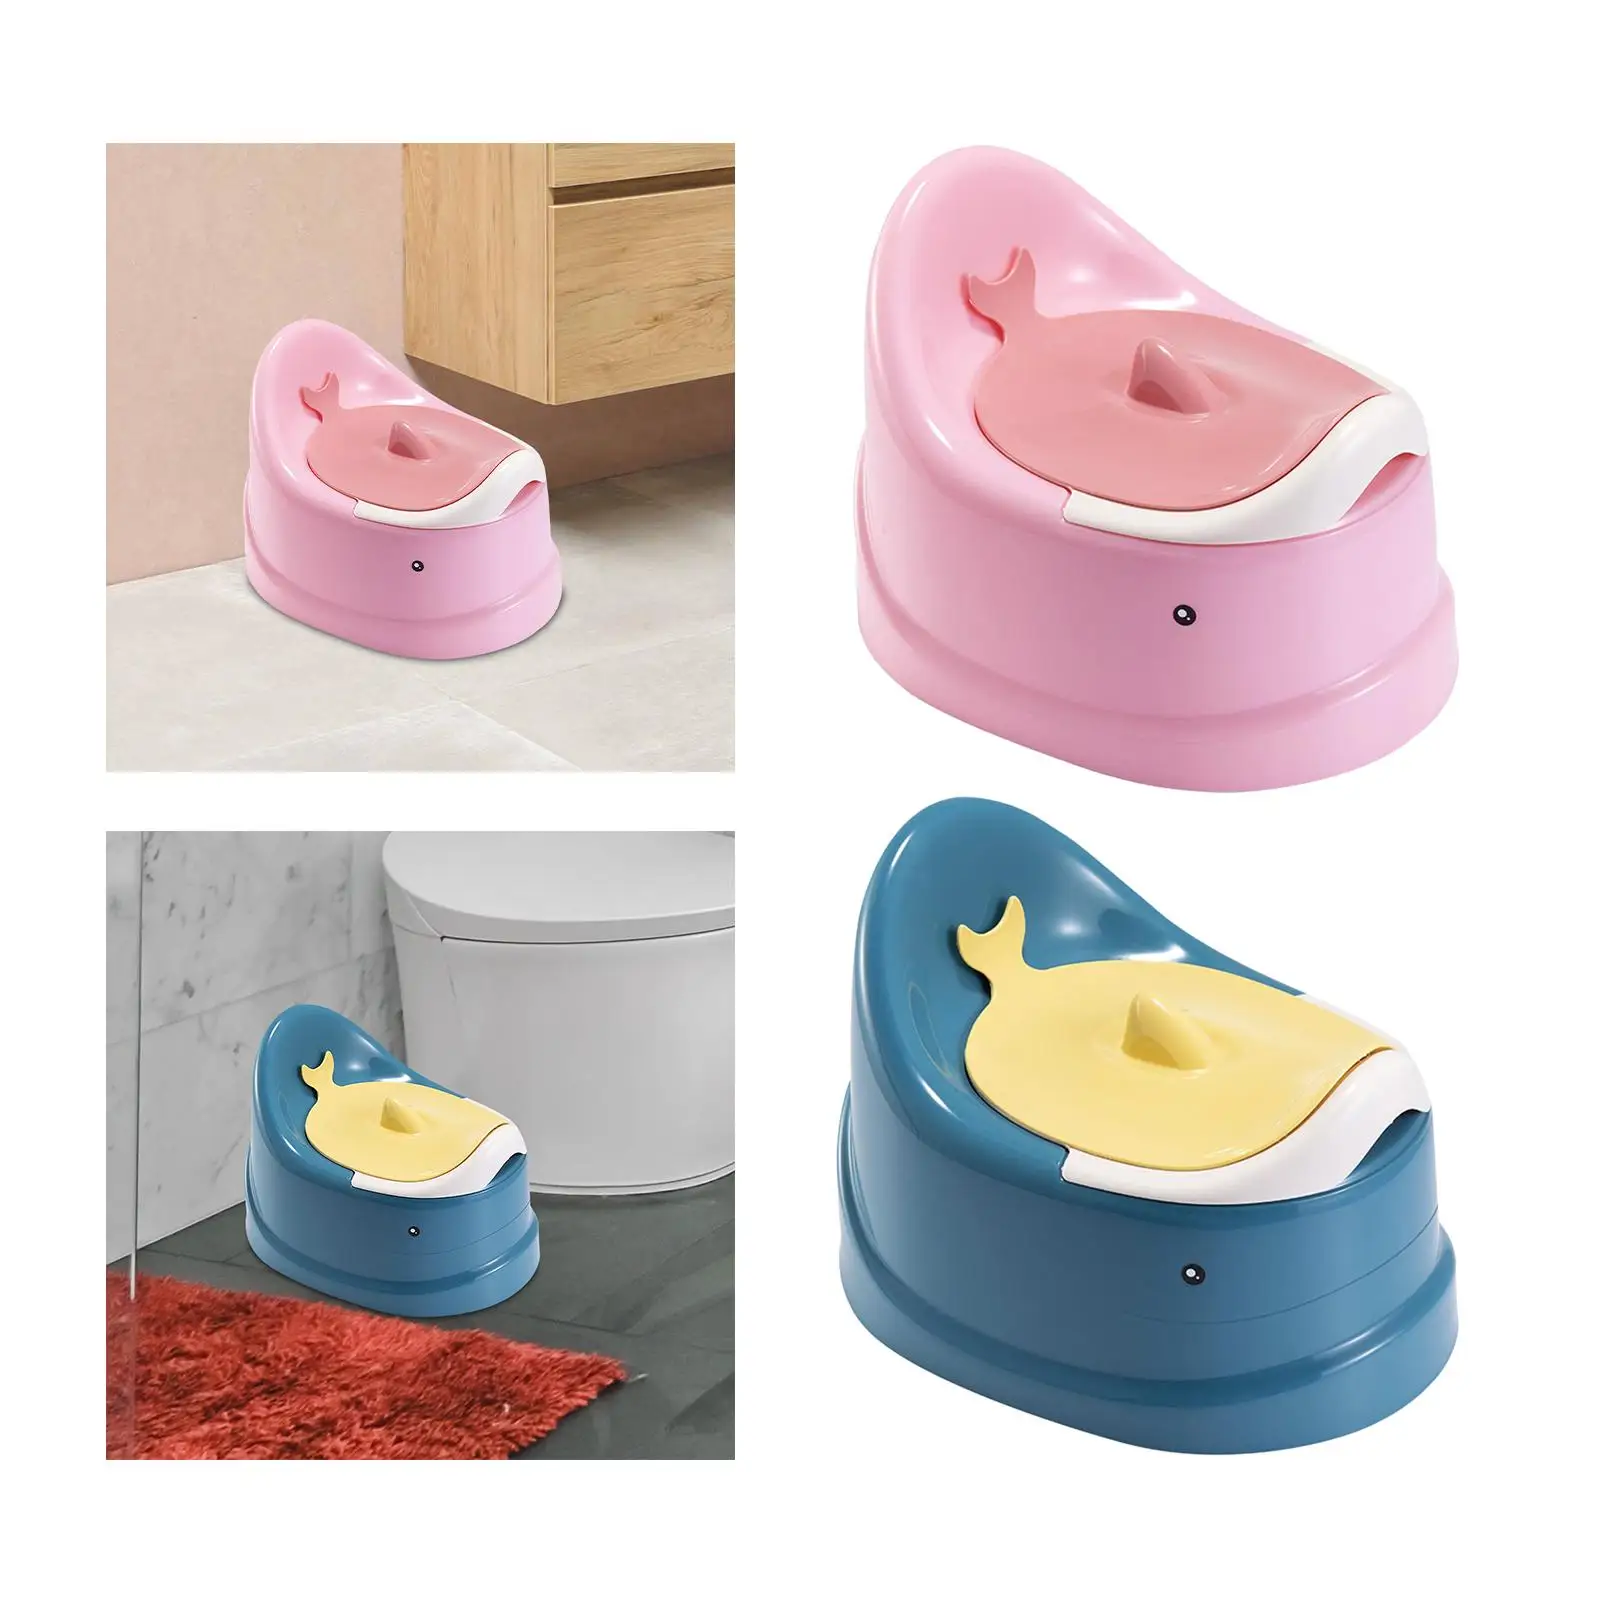 Potty Training Toilet for Girls Boys AntiSlip with Handle Easy to Clean Comfortable Potty Trainer Baby Potty Child Potty Chair